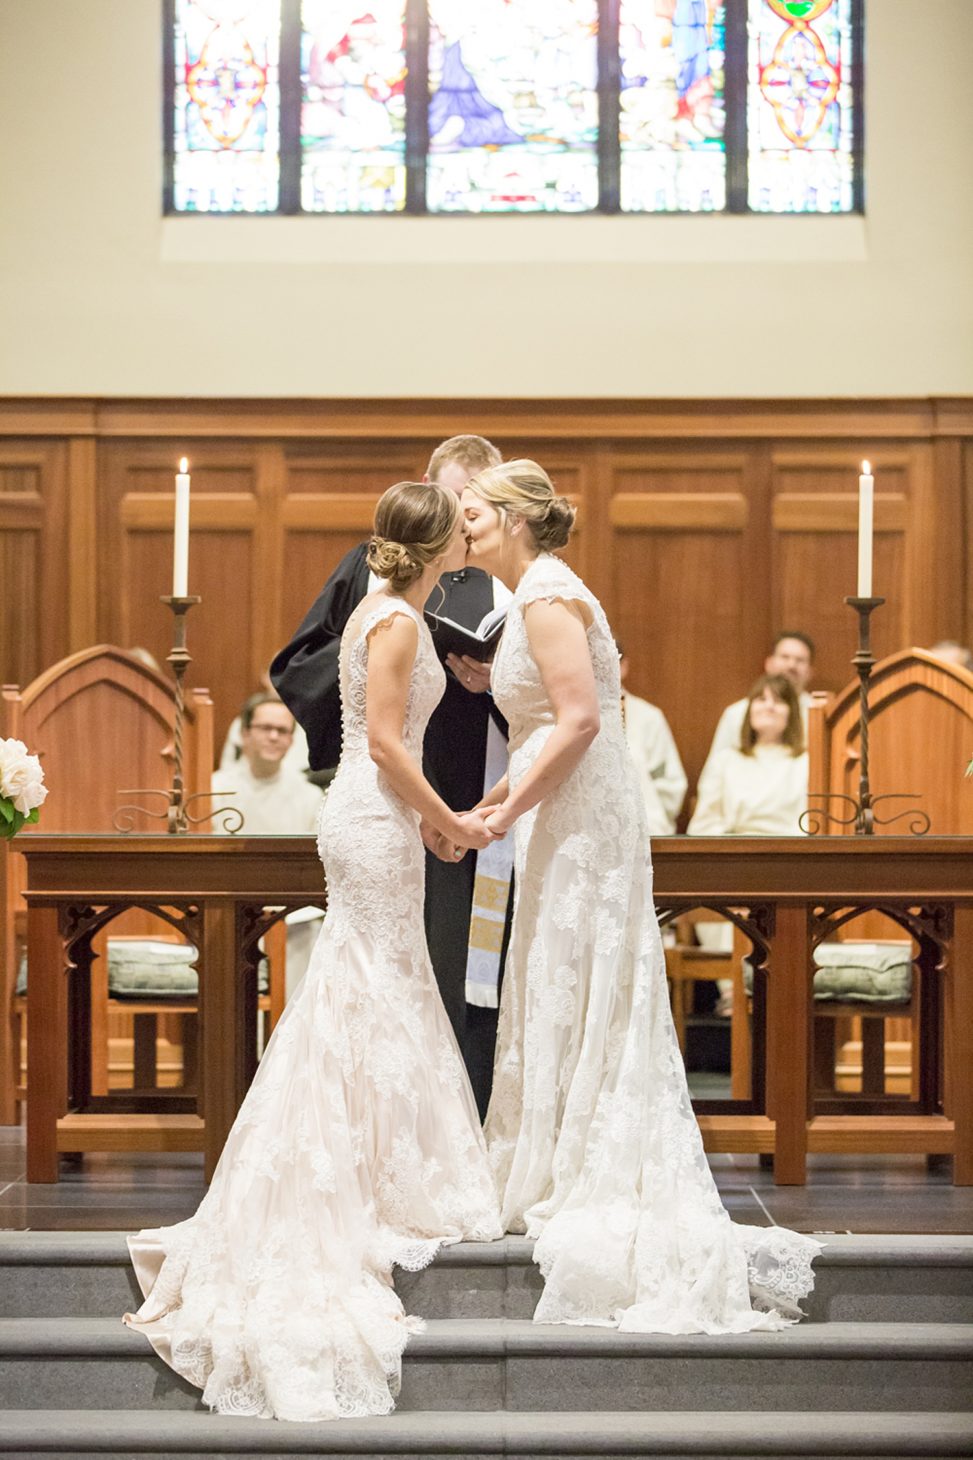 The ceremony took place in a church, just look at those beautiful dresses